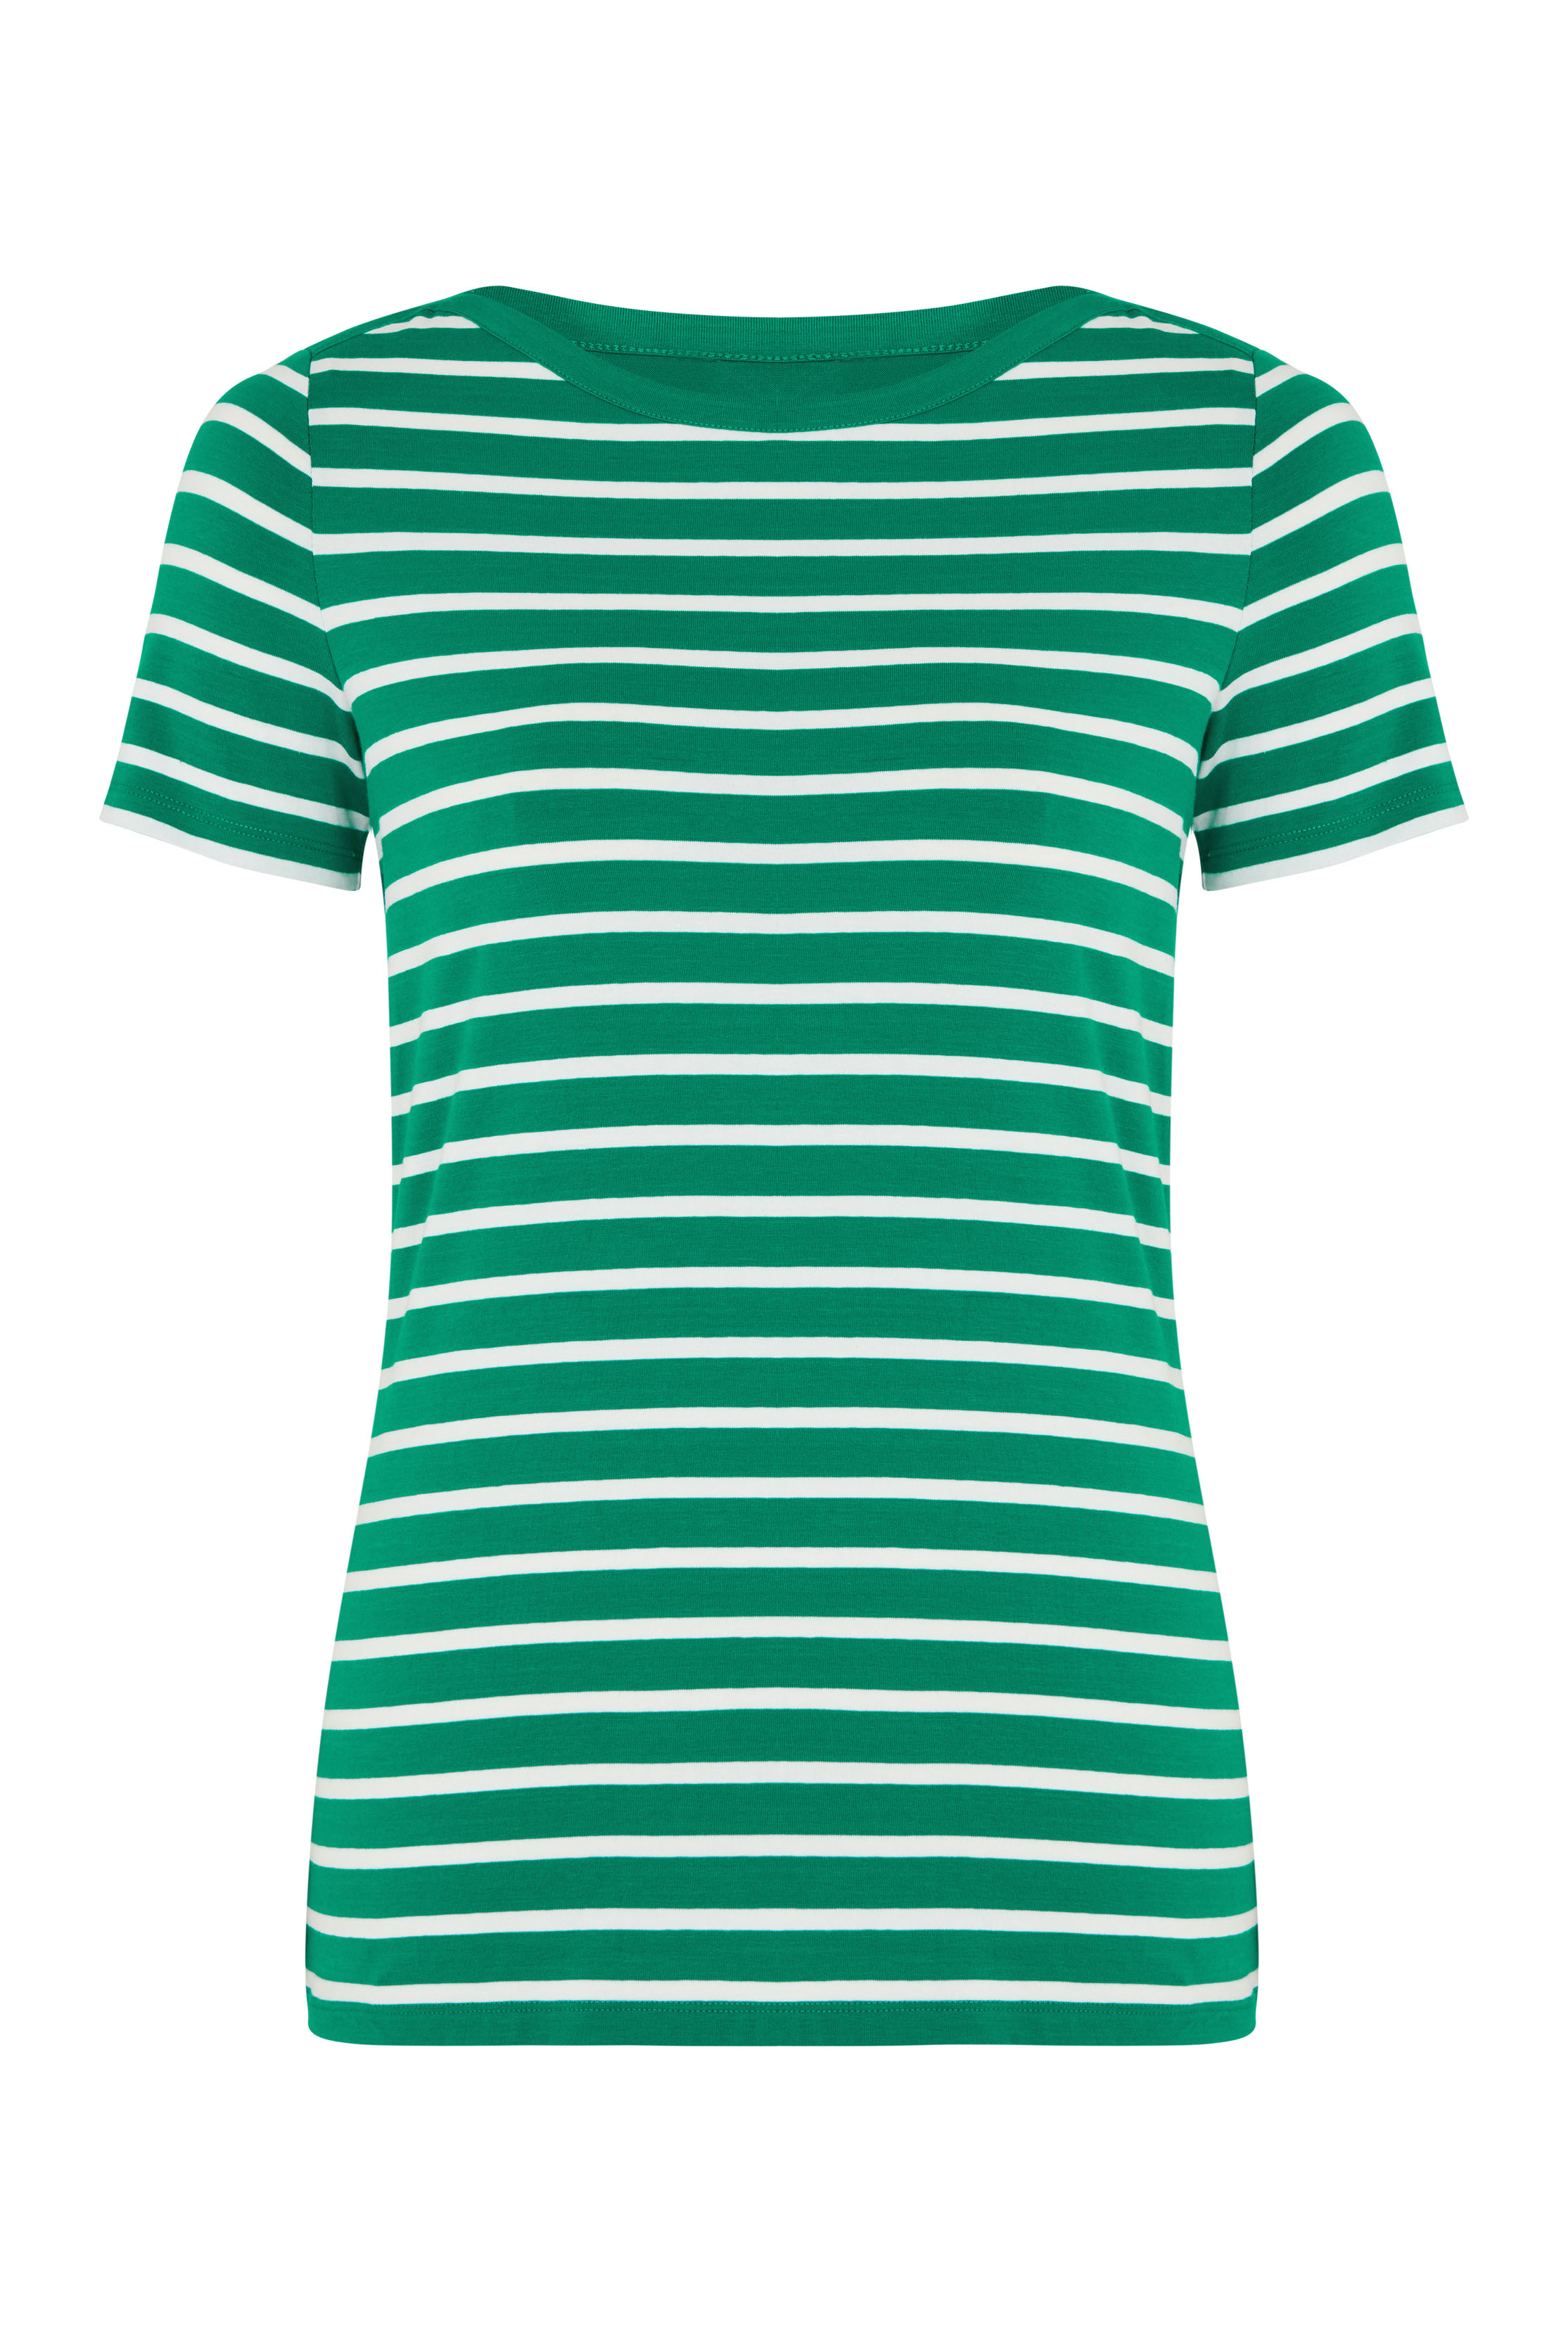 Green and White Stripe Cotton Boat Neck Tee | Long Tall Sally